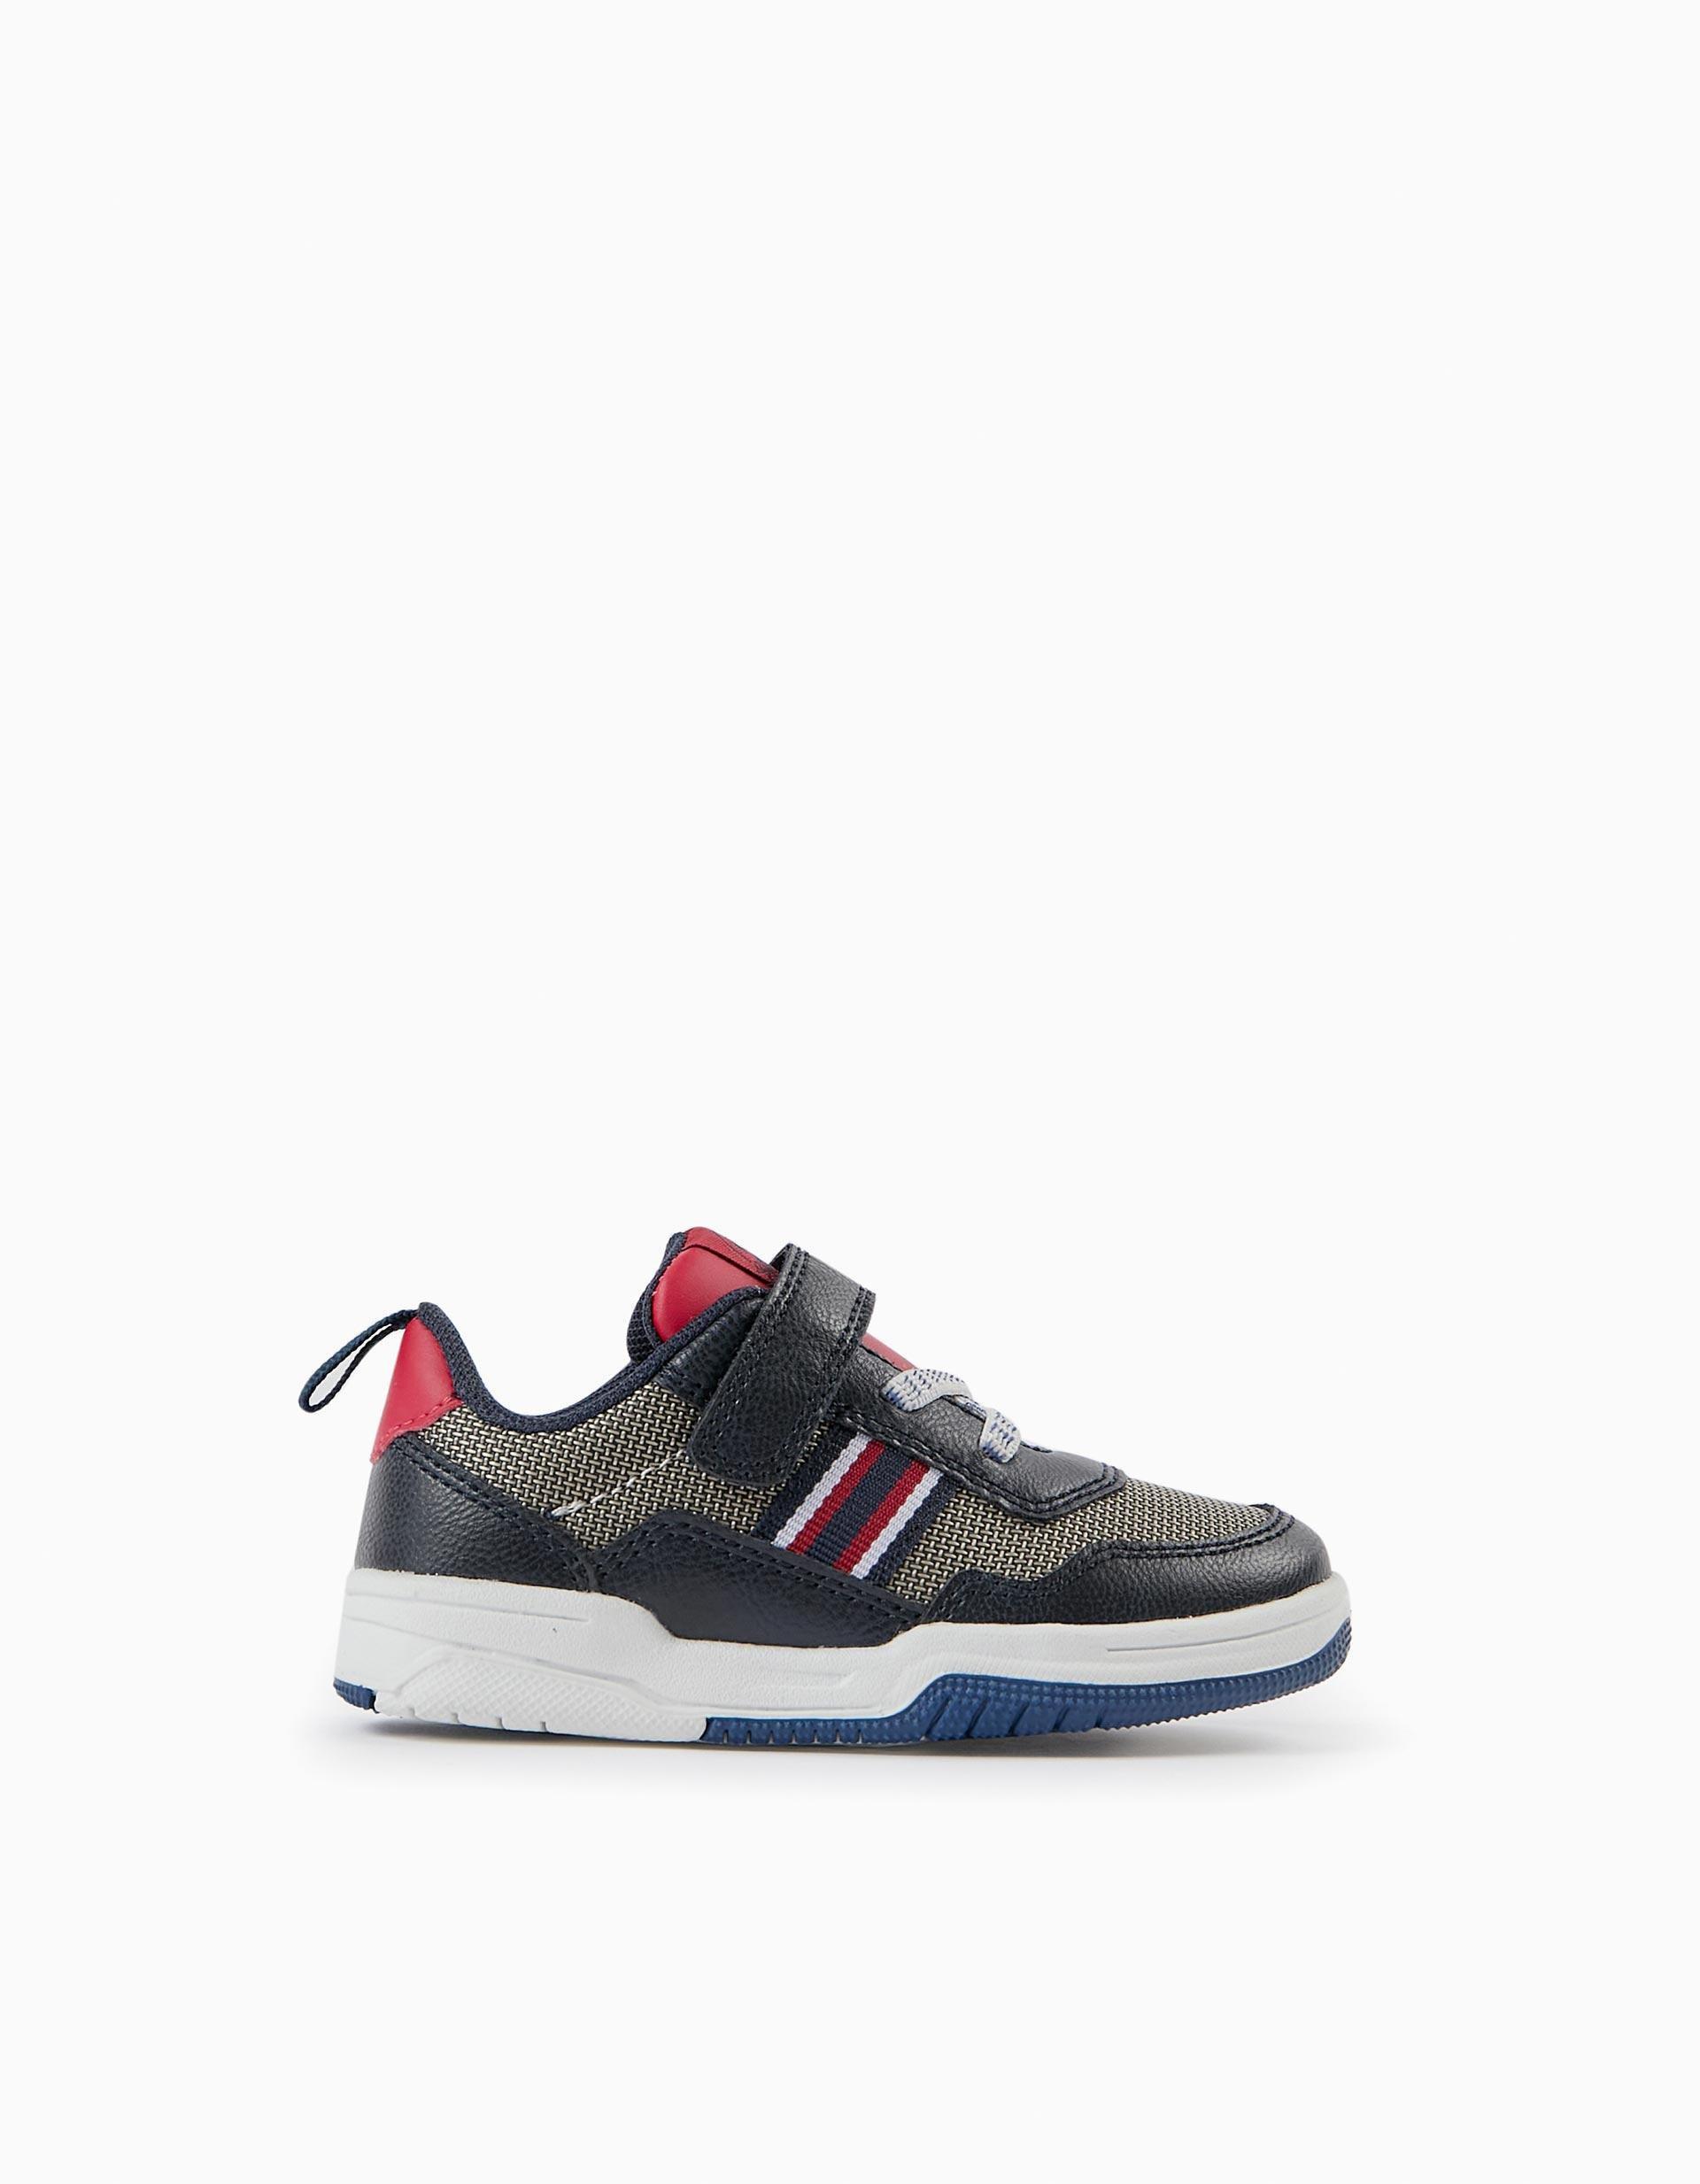 Gant - Multicolour Strappy Trainers, Baby Boys